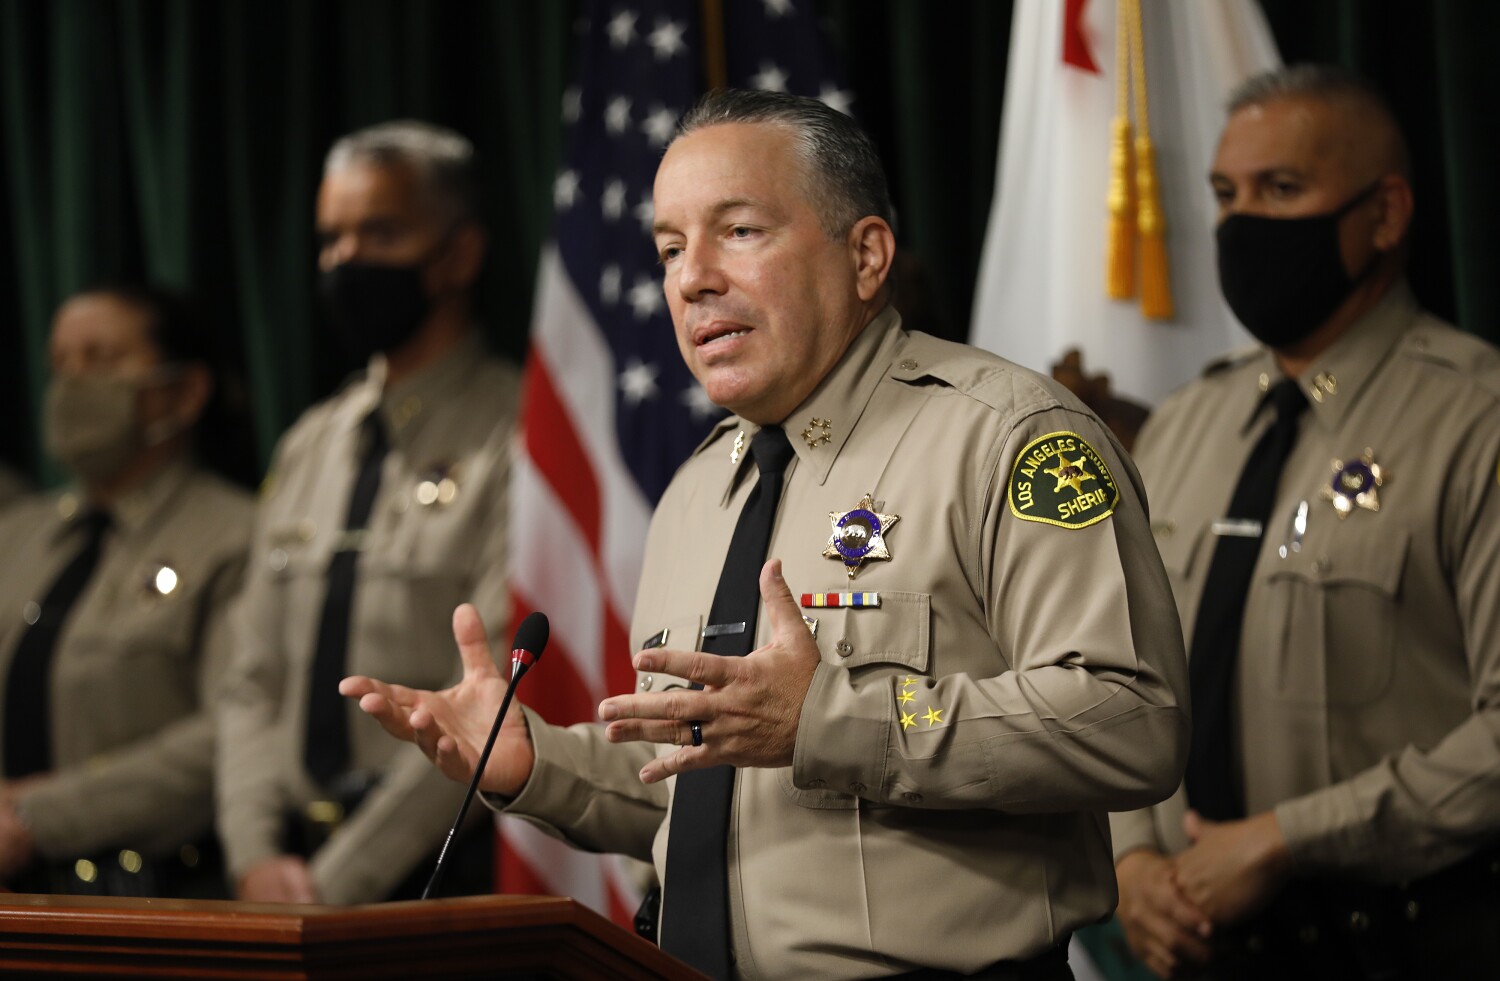 Compton accuses L.A. County Sheriff's Department of 'ghost car' patrol scam